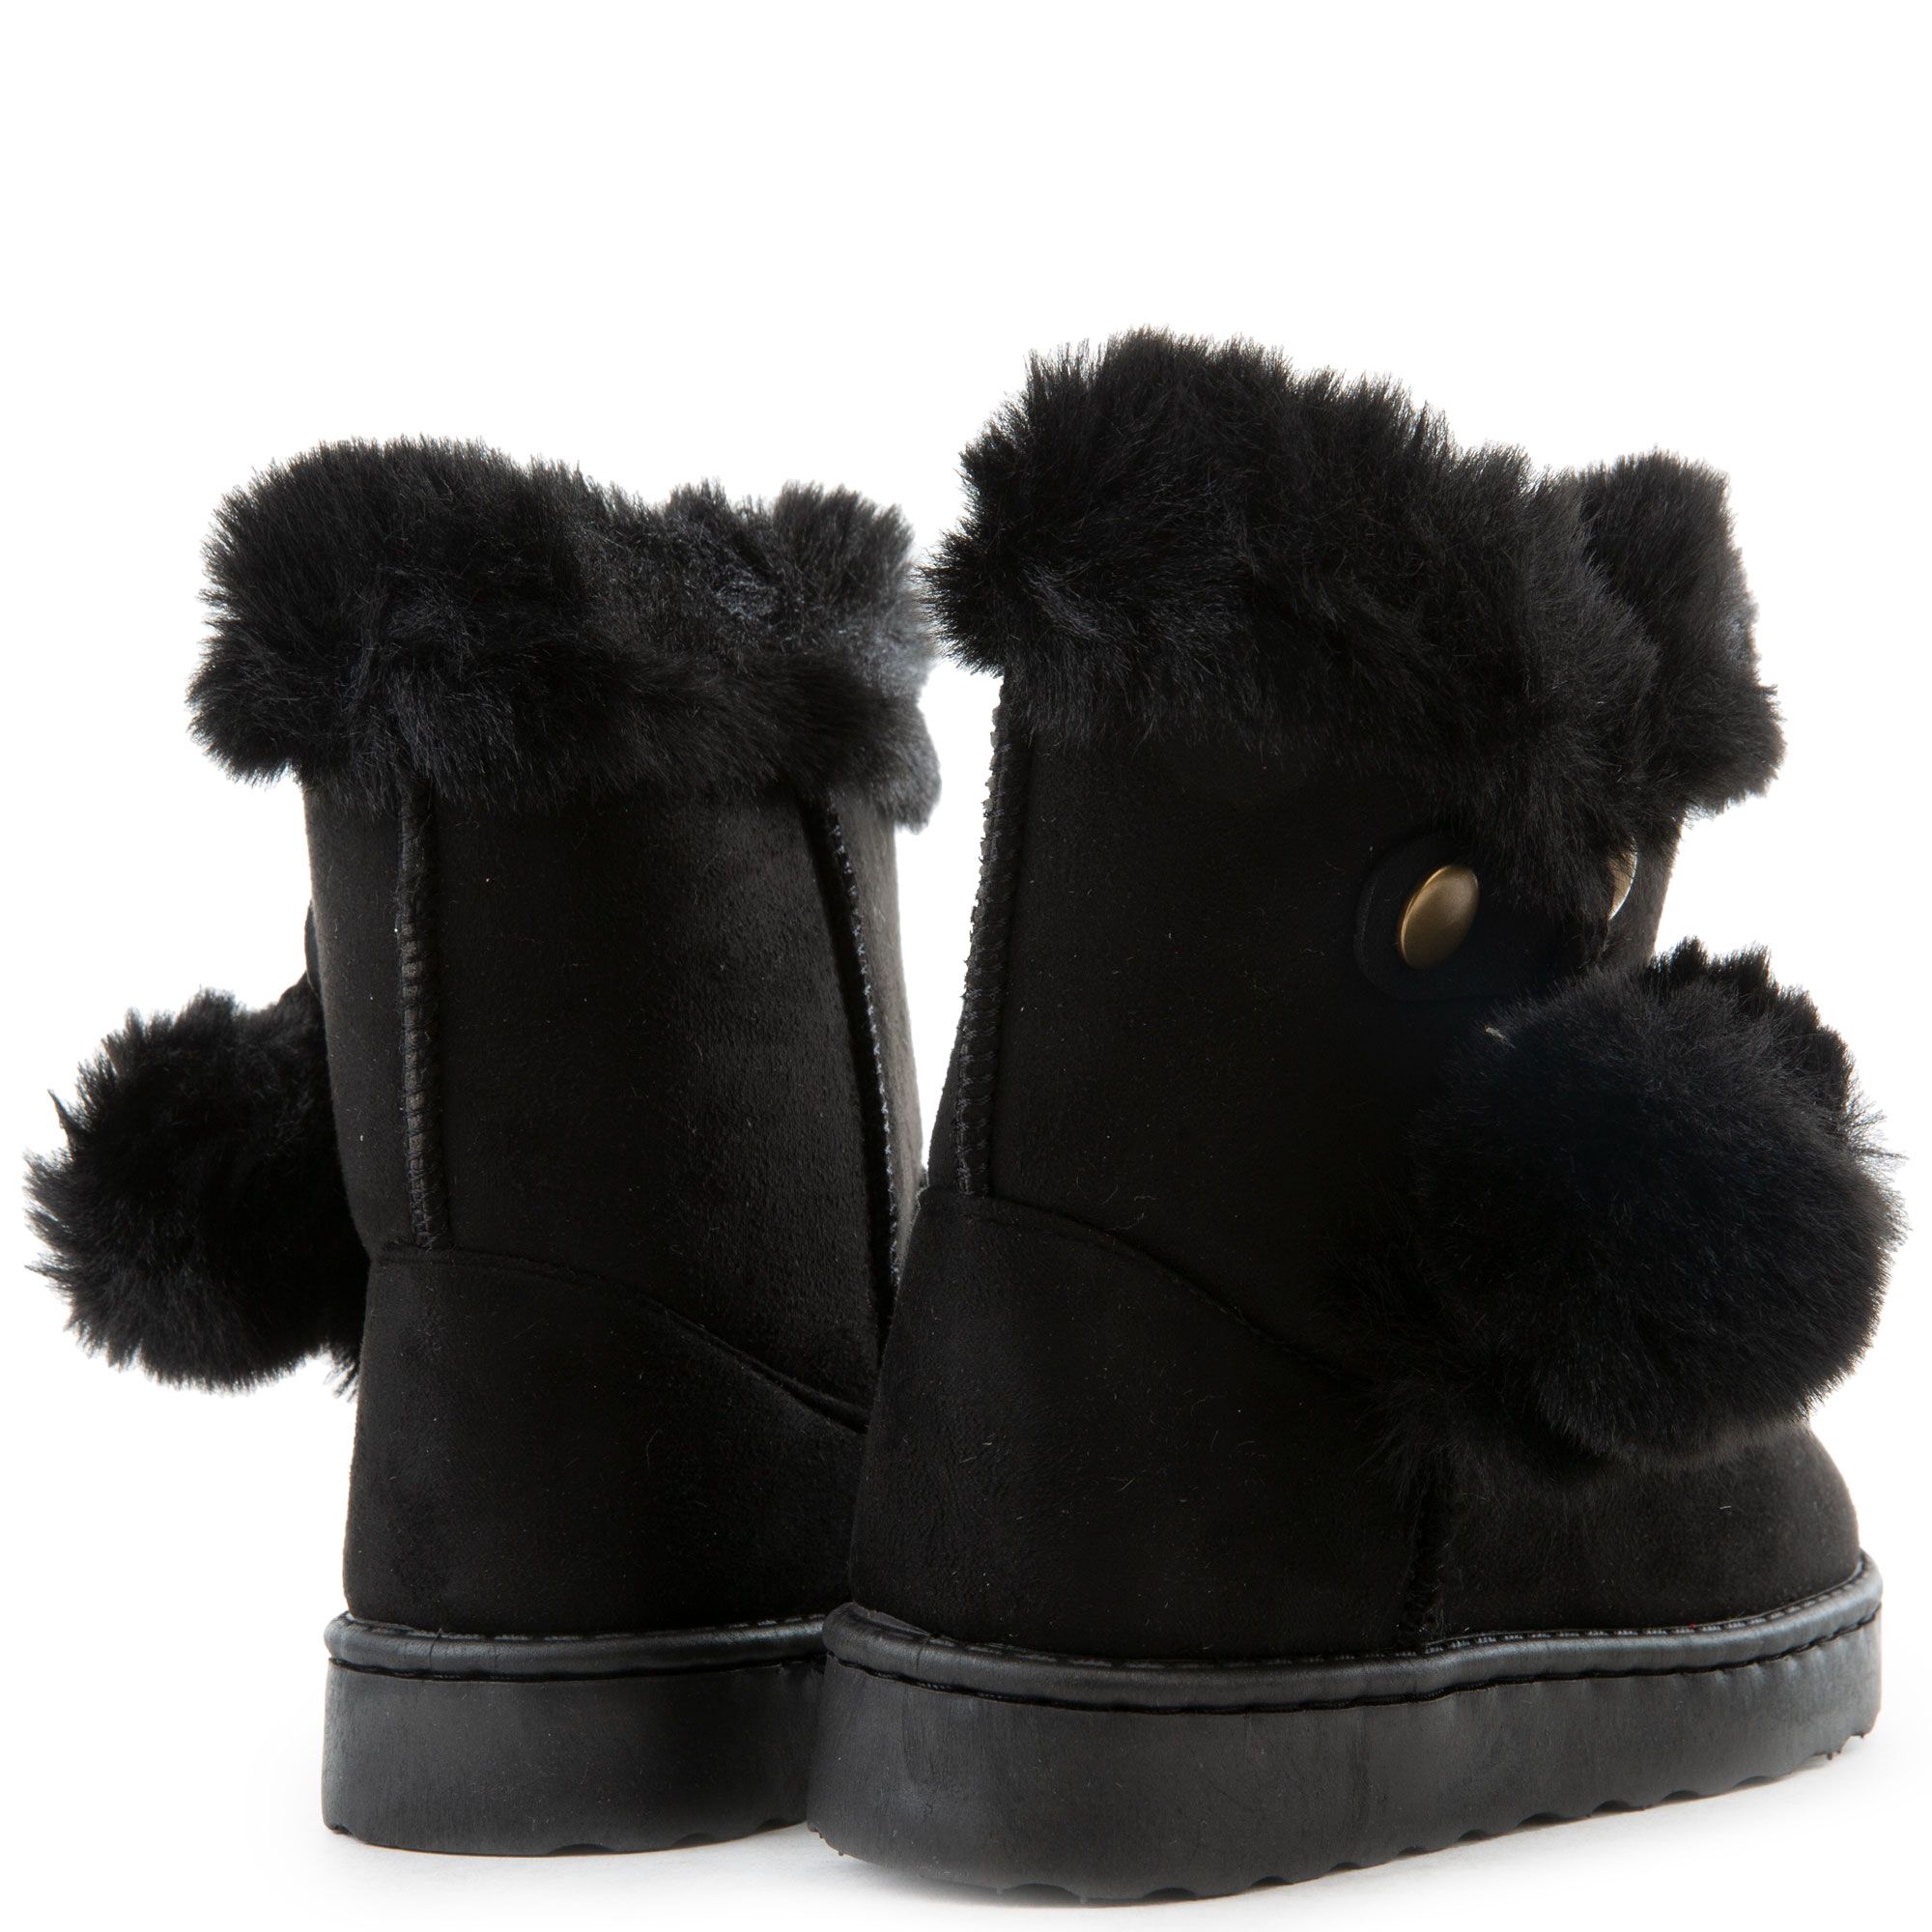 UNKNOWN (PS) Mid-Calf Fur Boots R001-1917K-BLK - Shiekh